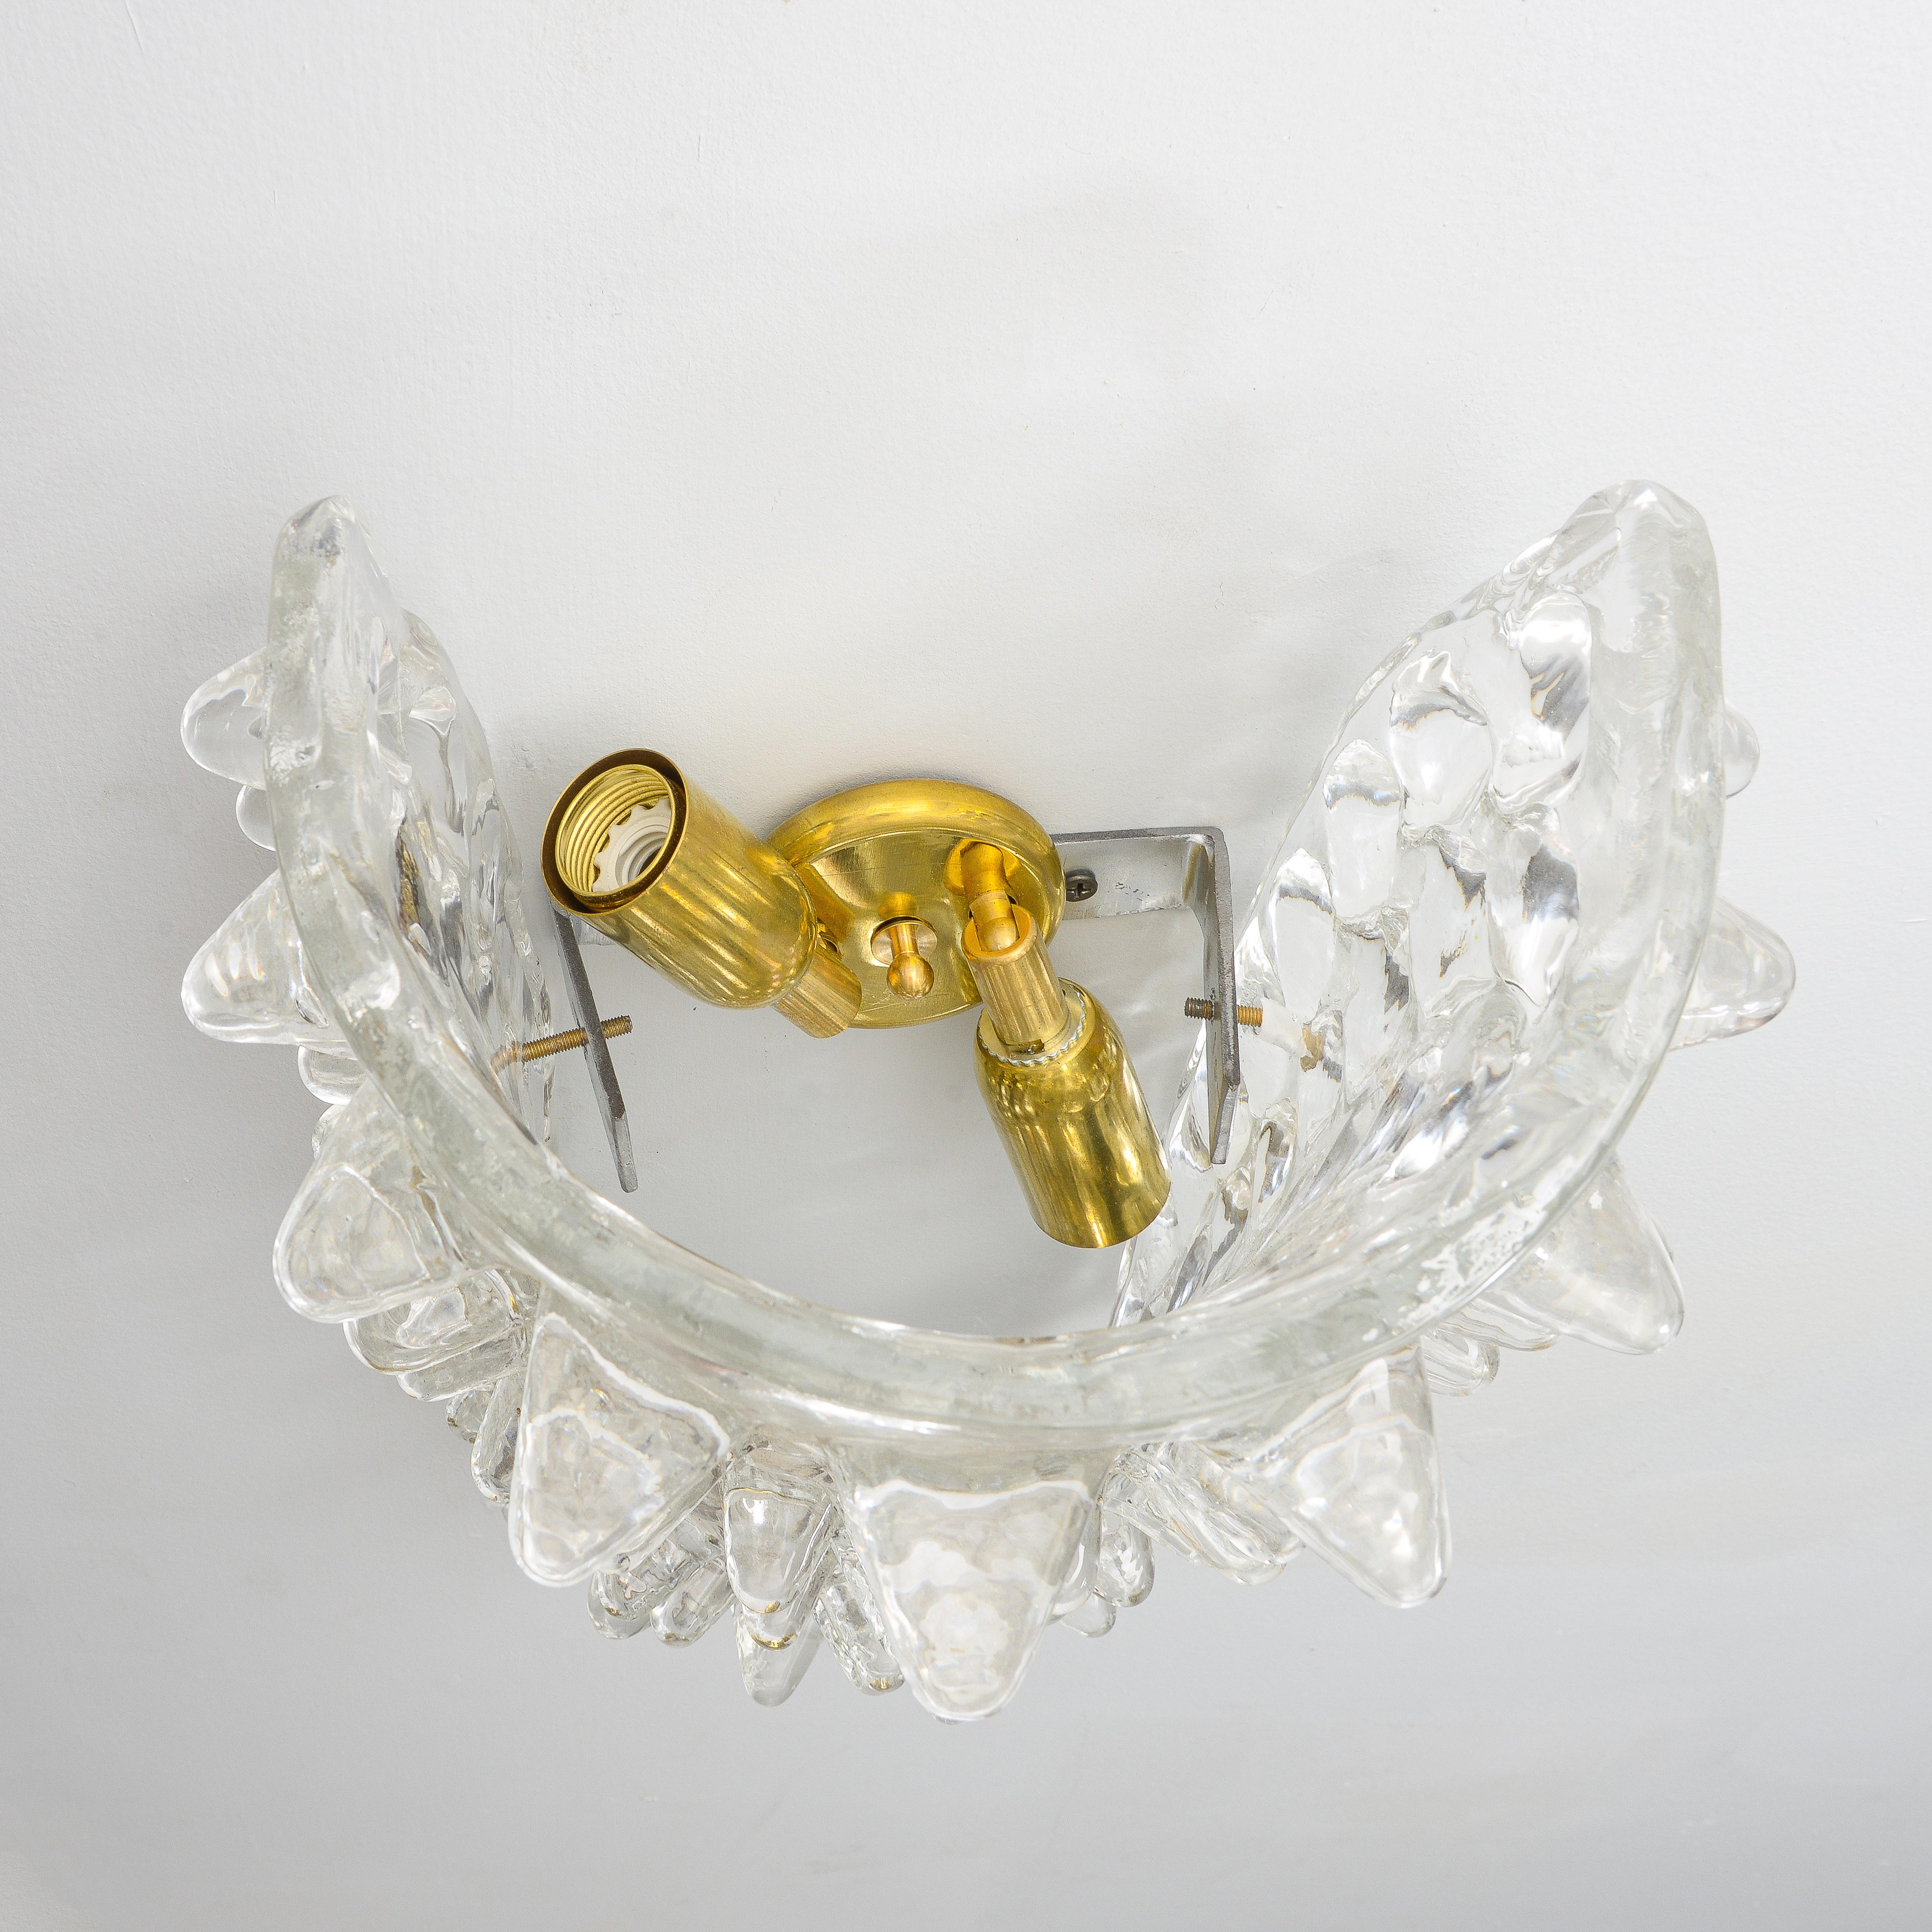 Contemporary Murano Glass Sconces in the Manner of Barovier Toso For Sale 6